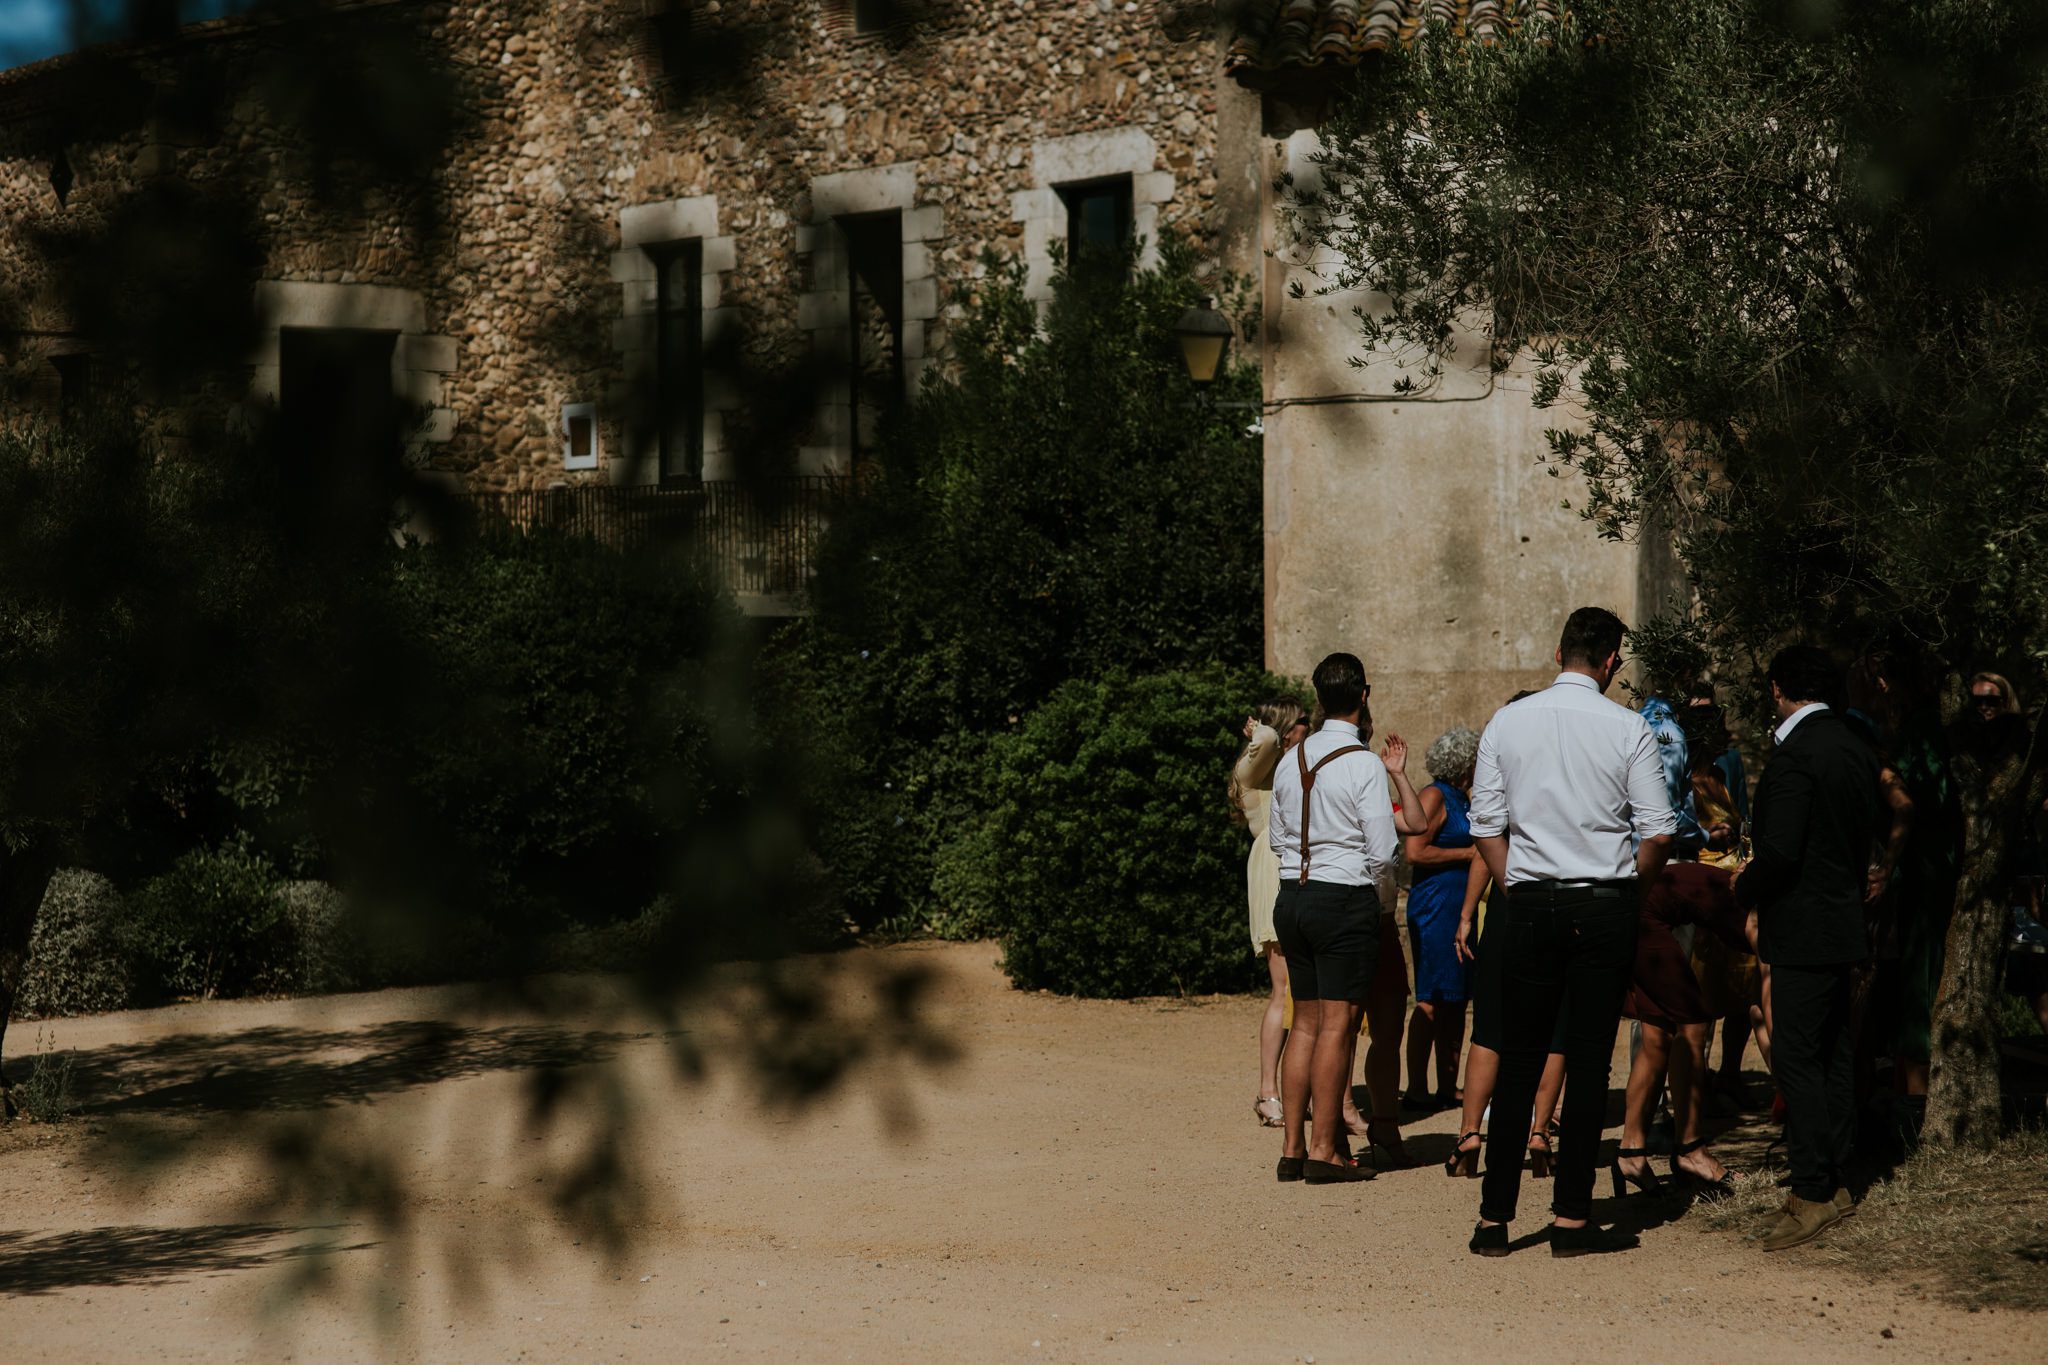 Guests mingle before a wedding ceremony at Castel D'Emporda, Spain